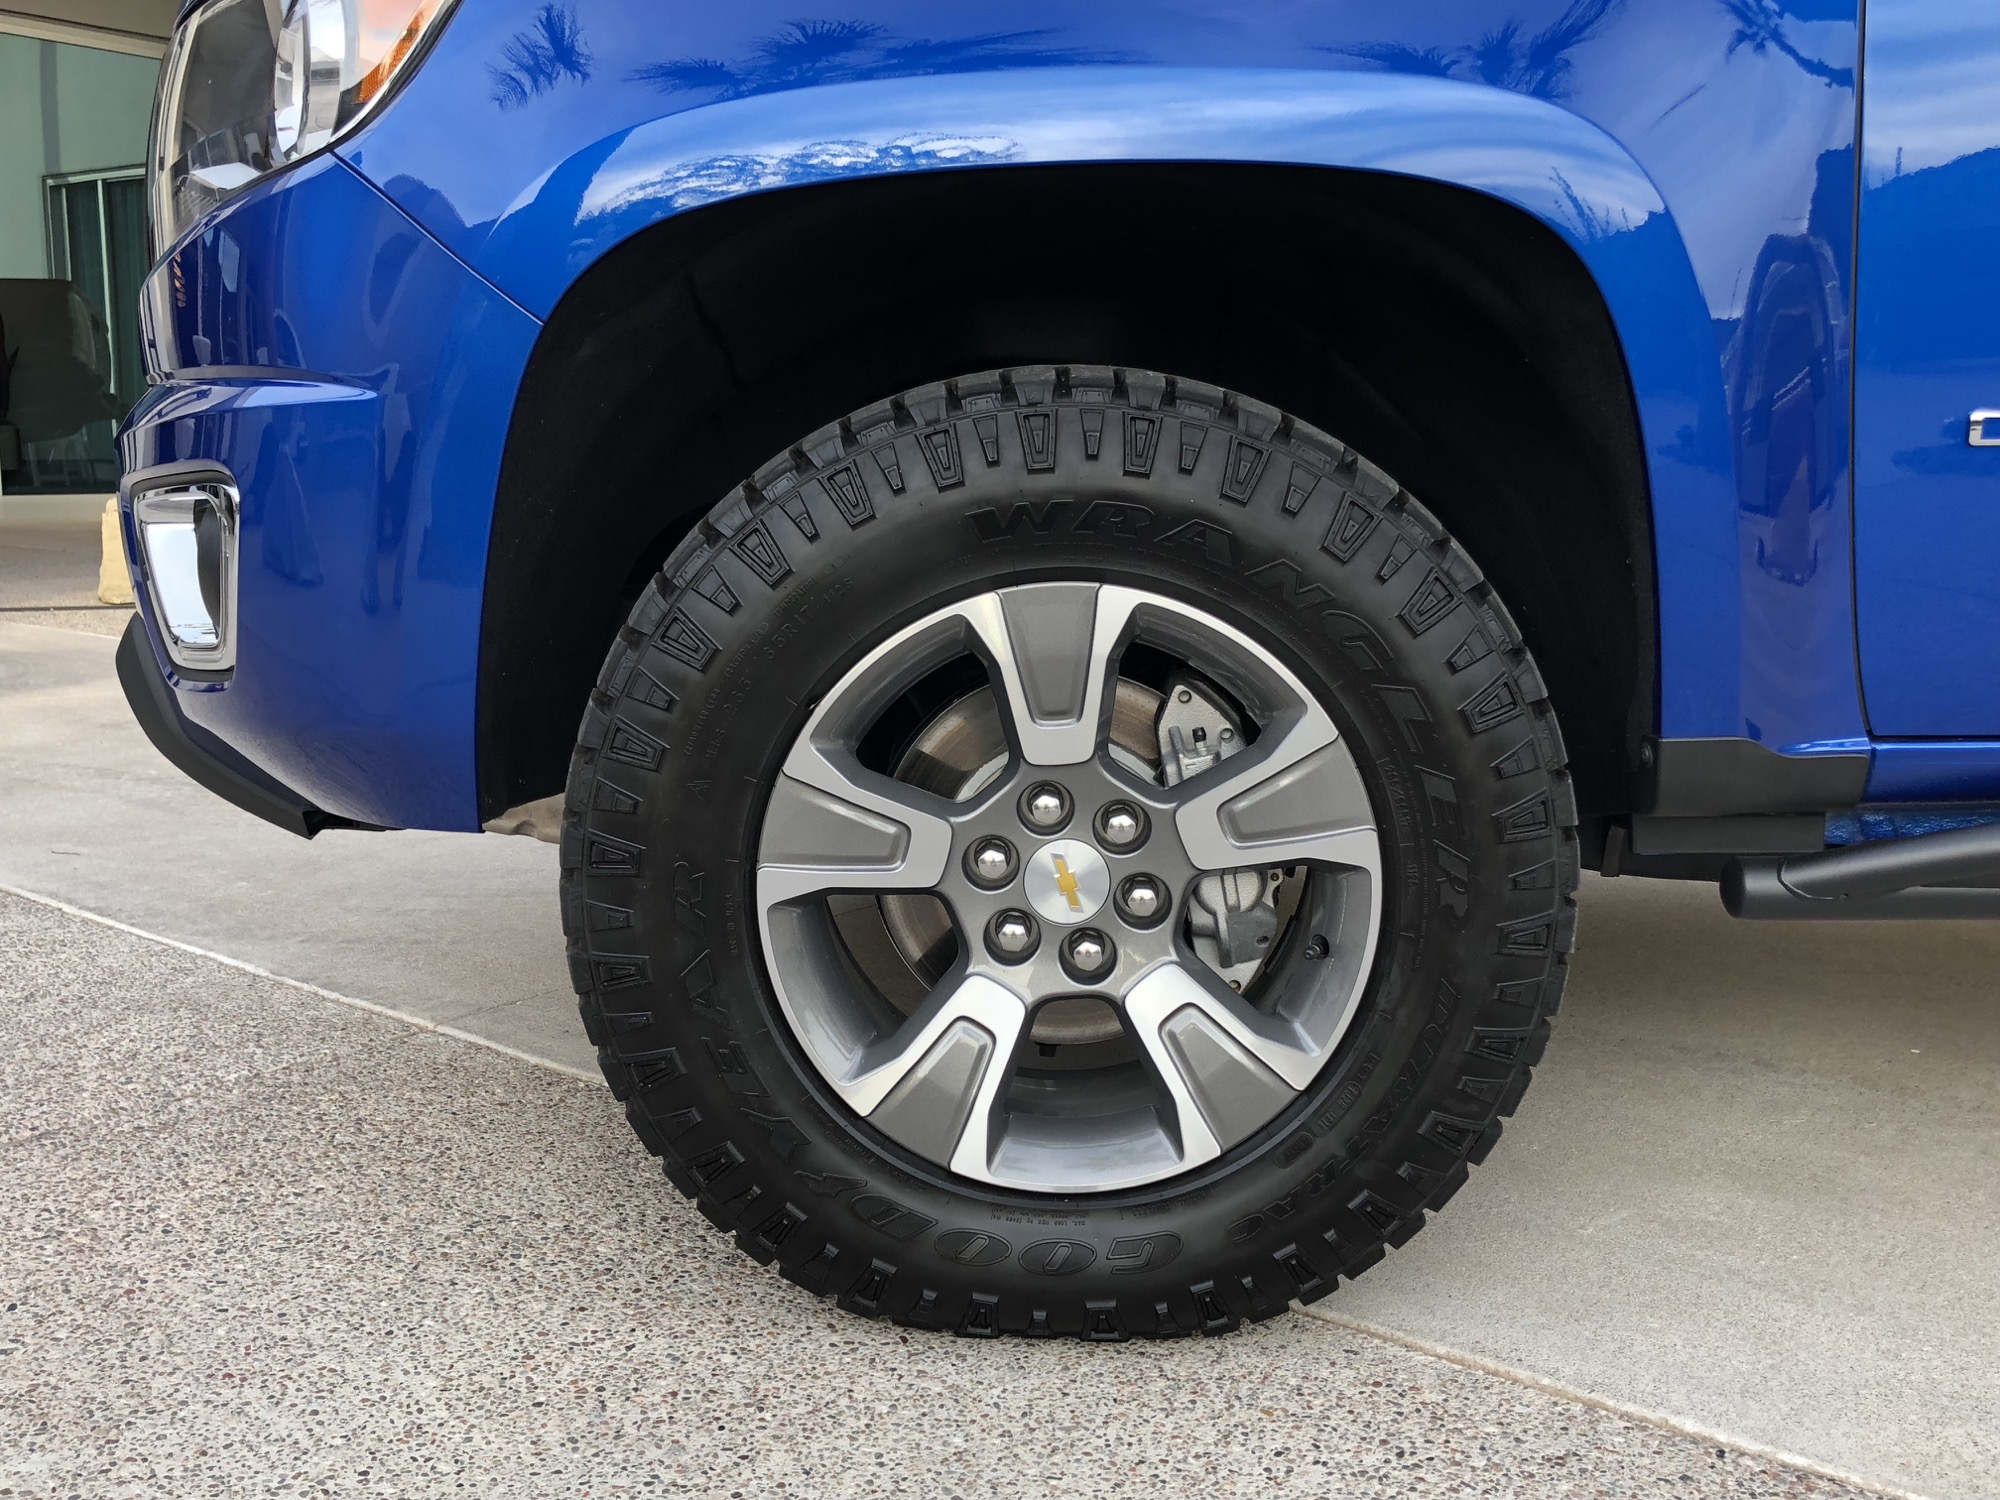 2019 Chevrolet Colorado Z71 Trail Runner: Live Photo Gallery | GM Authority